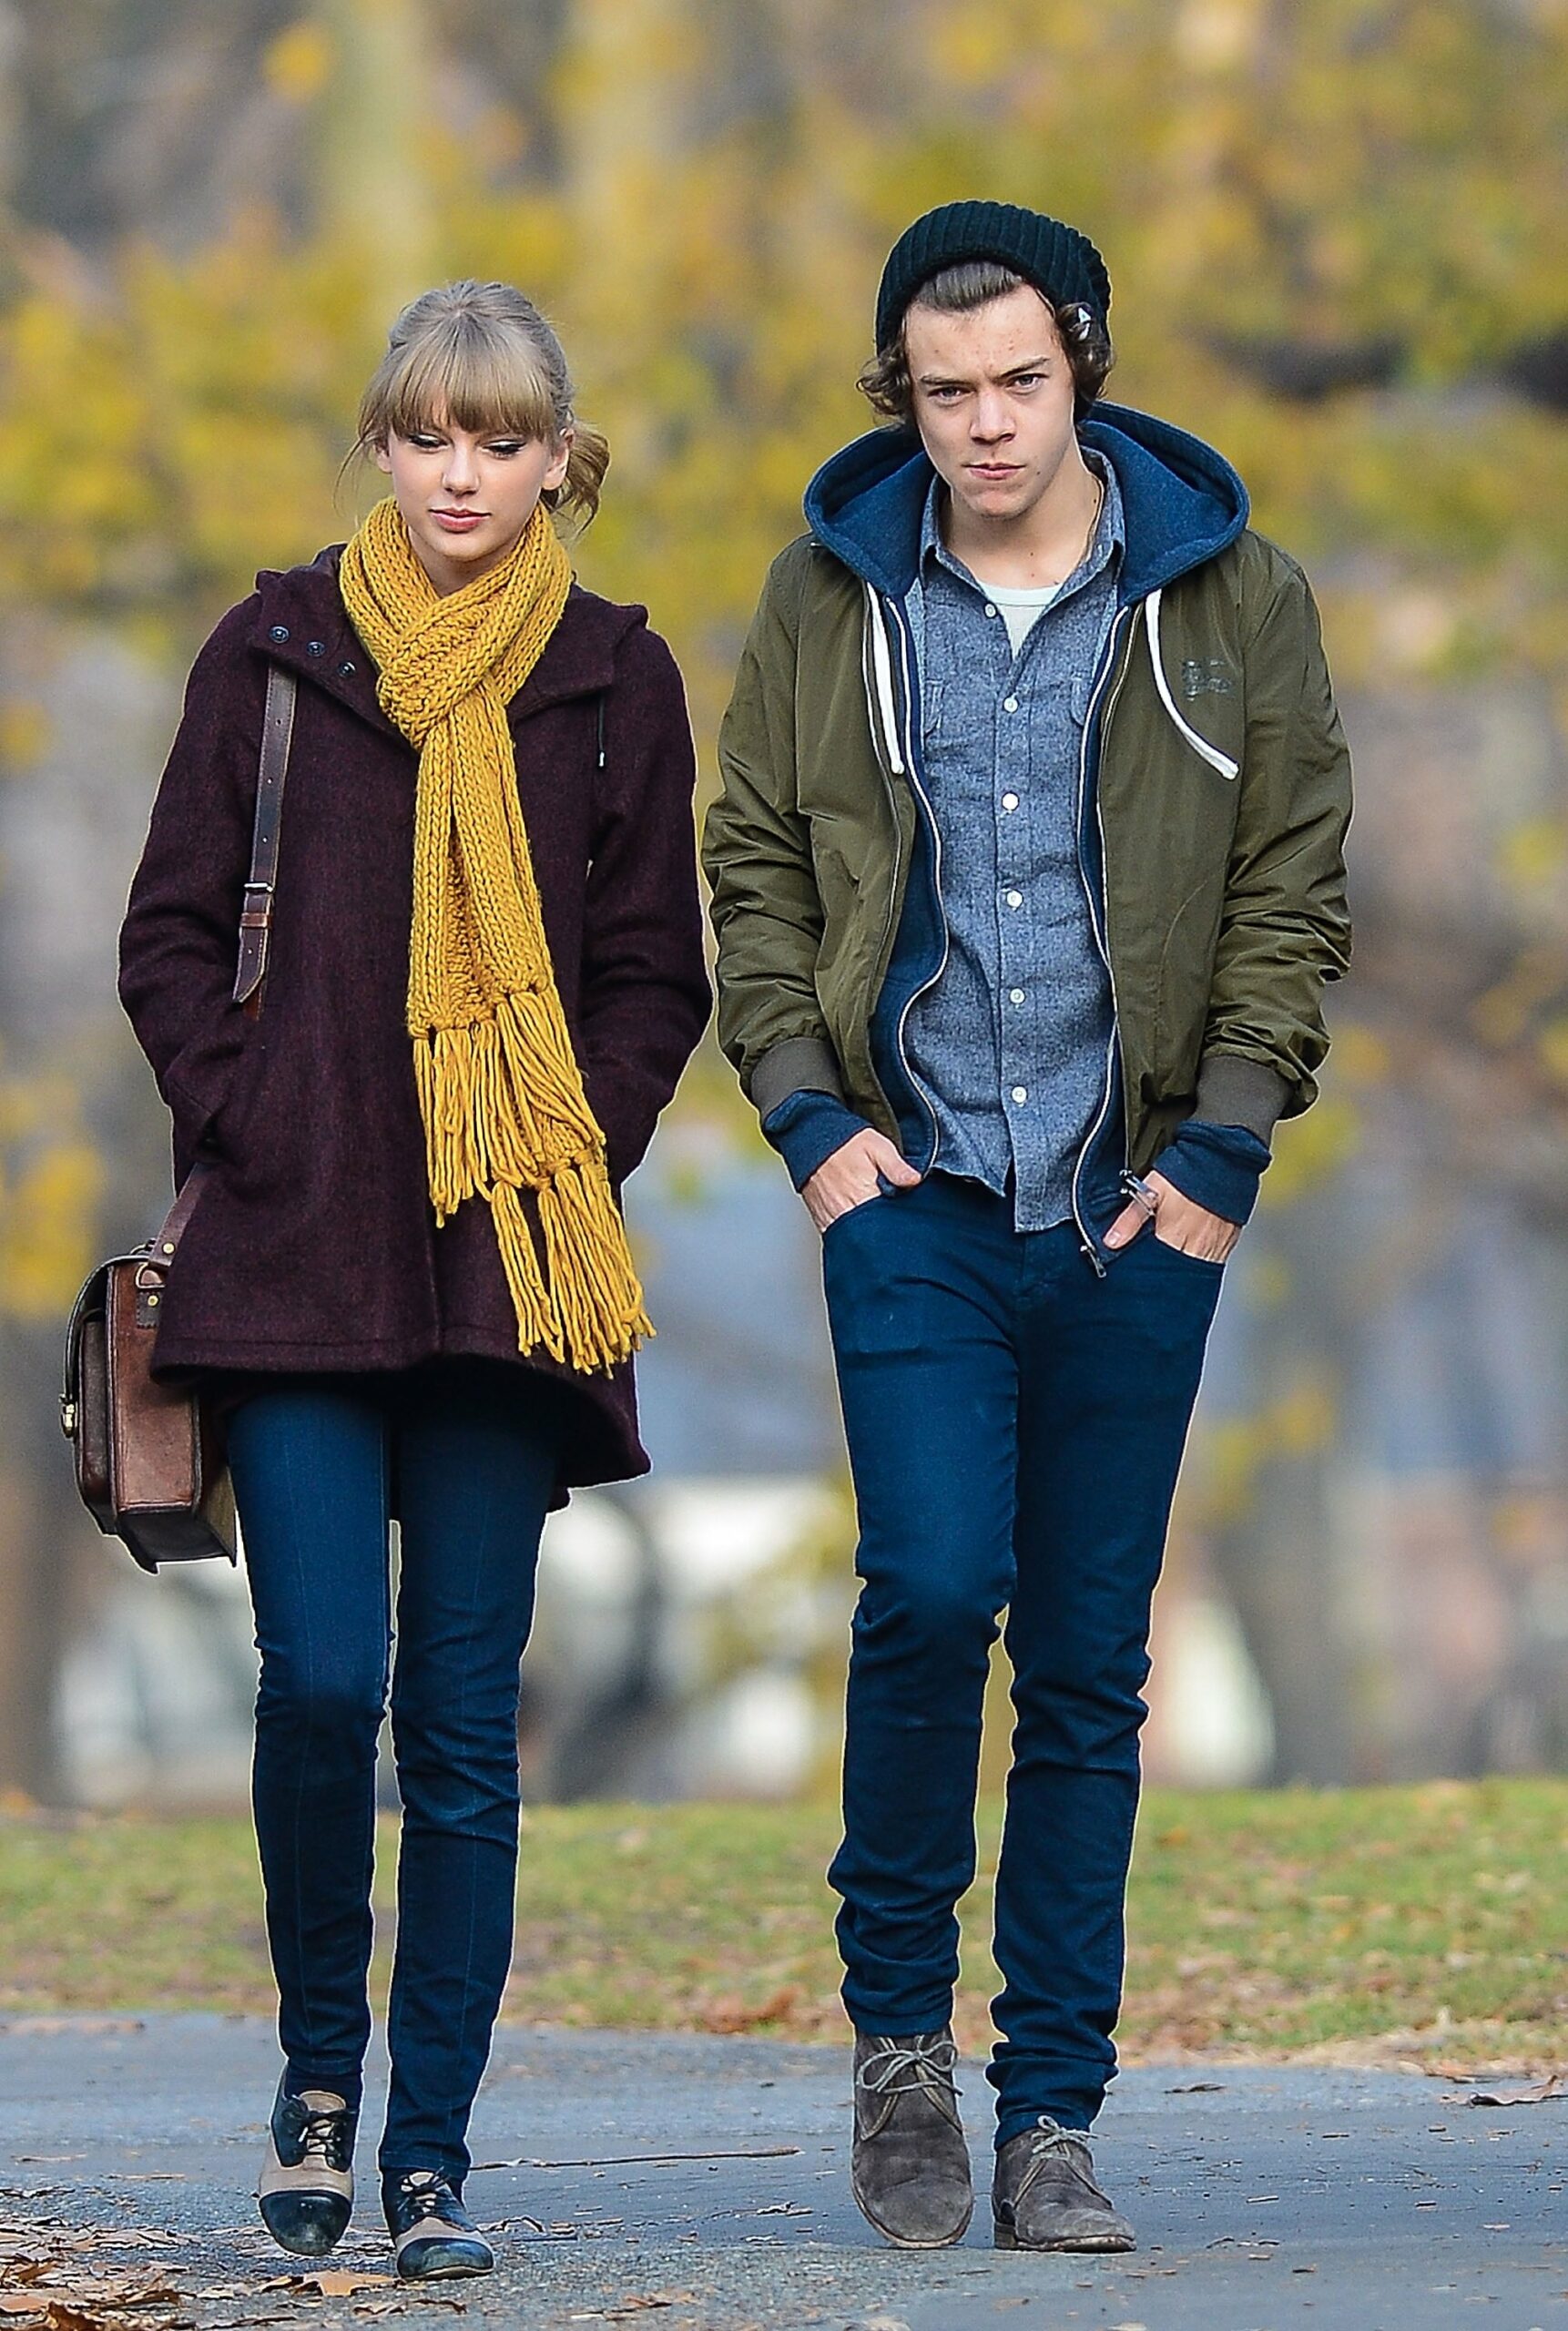 NEW YORK, NY - DECEMBER 02: Taylor Swift and Harry Styles are seen walking around Central Park on December 02, 2012 in New York City.  (Photo by David Krieger/Bauer-Griffin/GC Images)